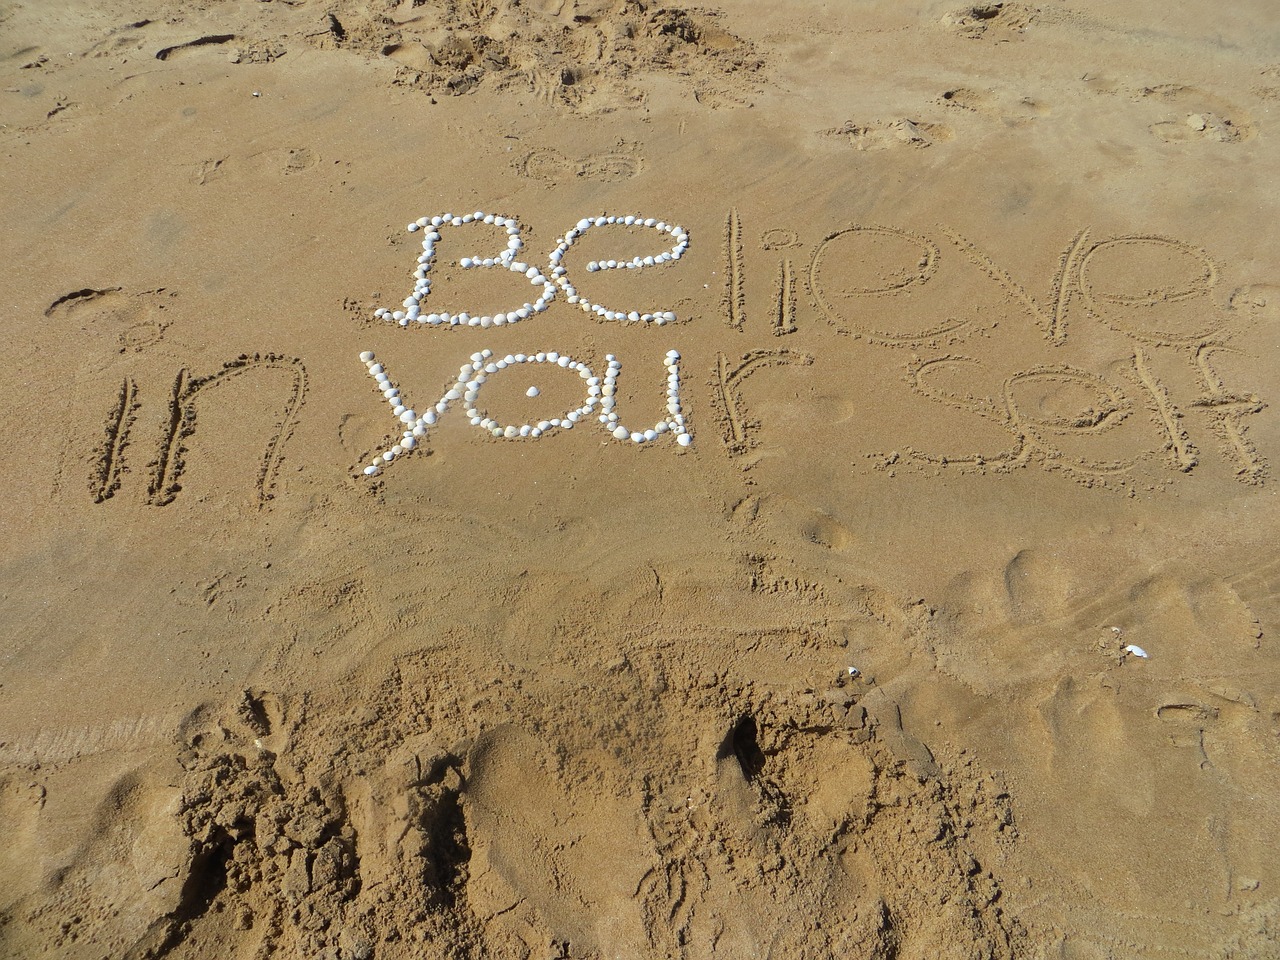 Be you written in the sand